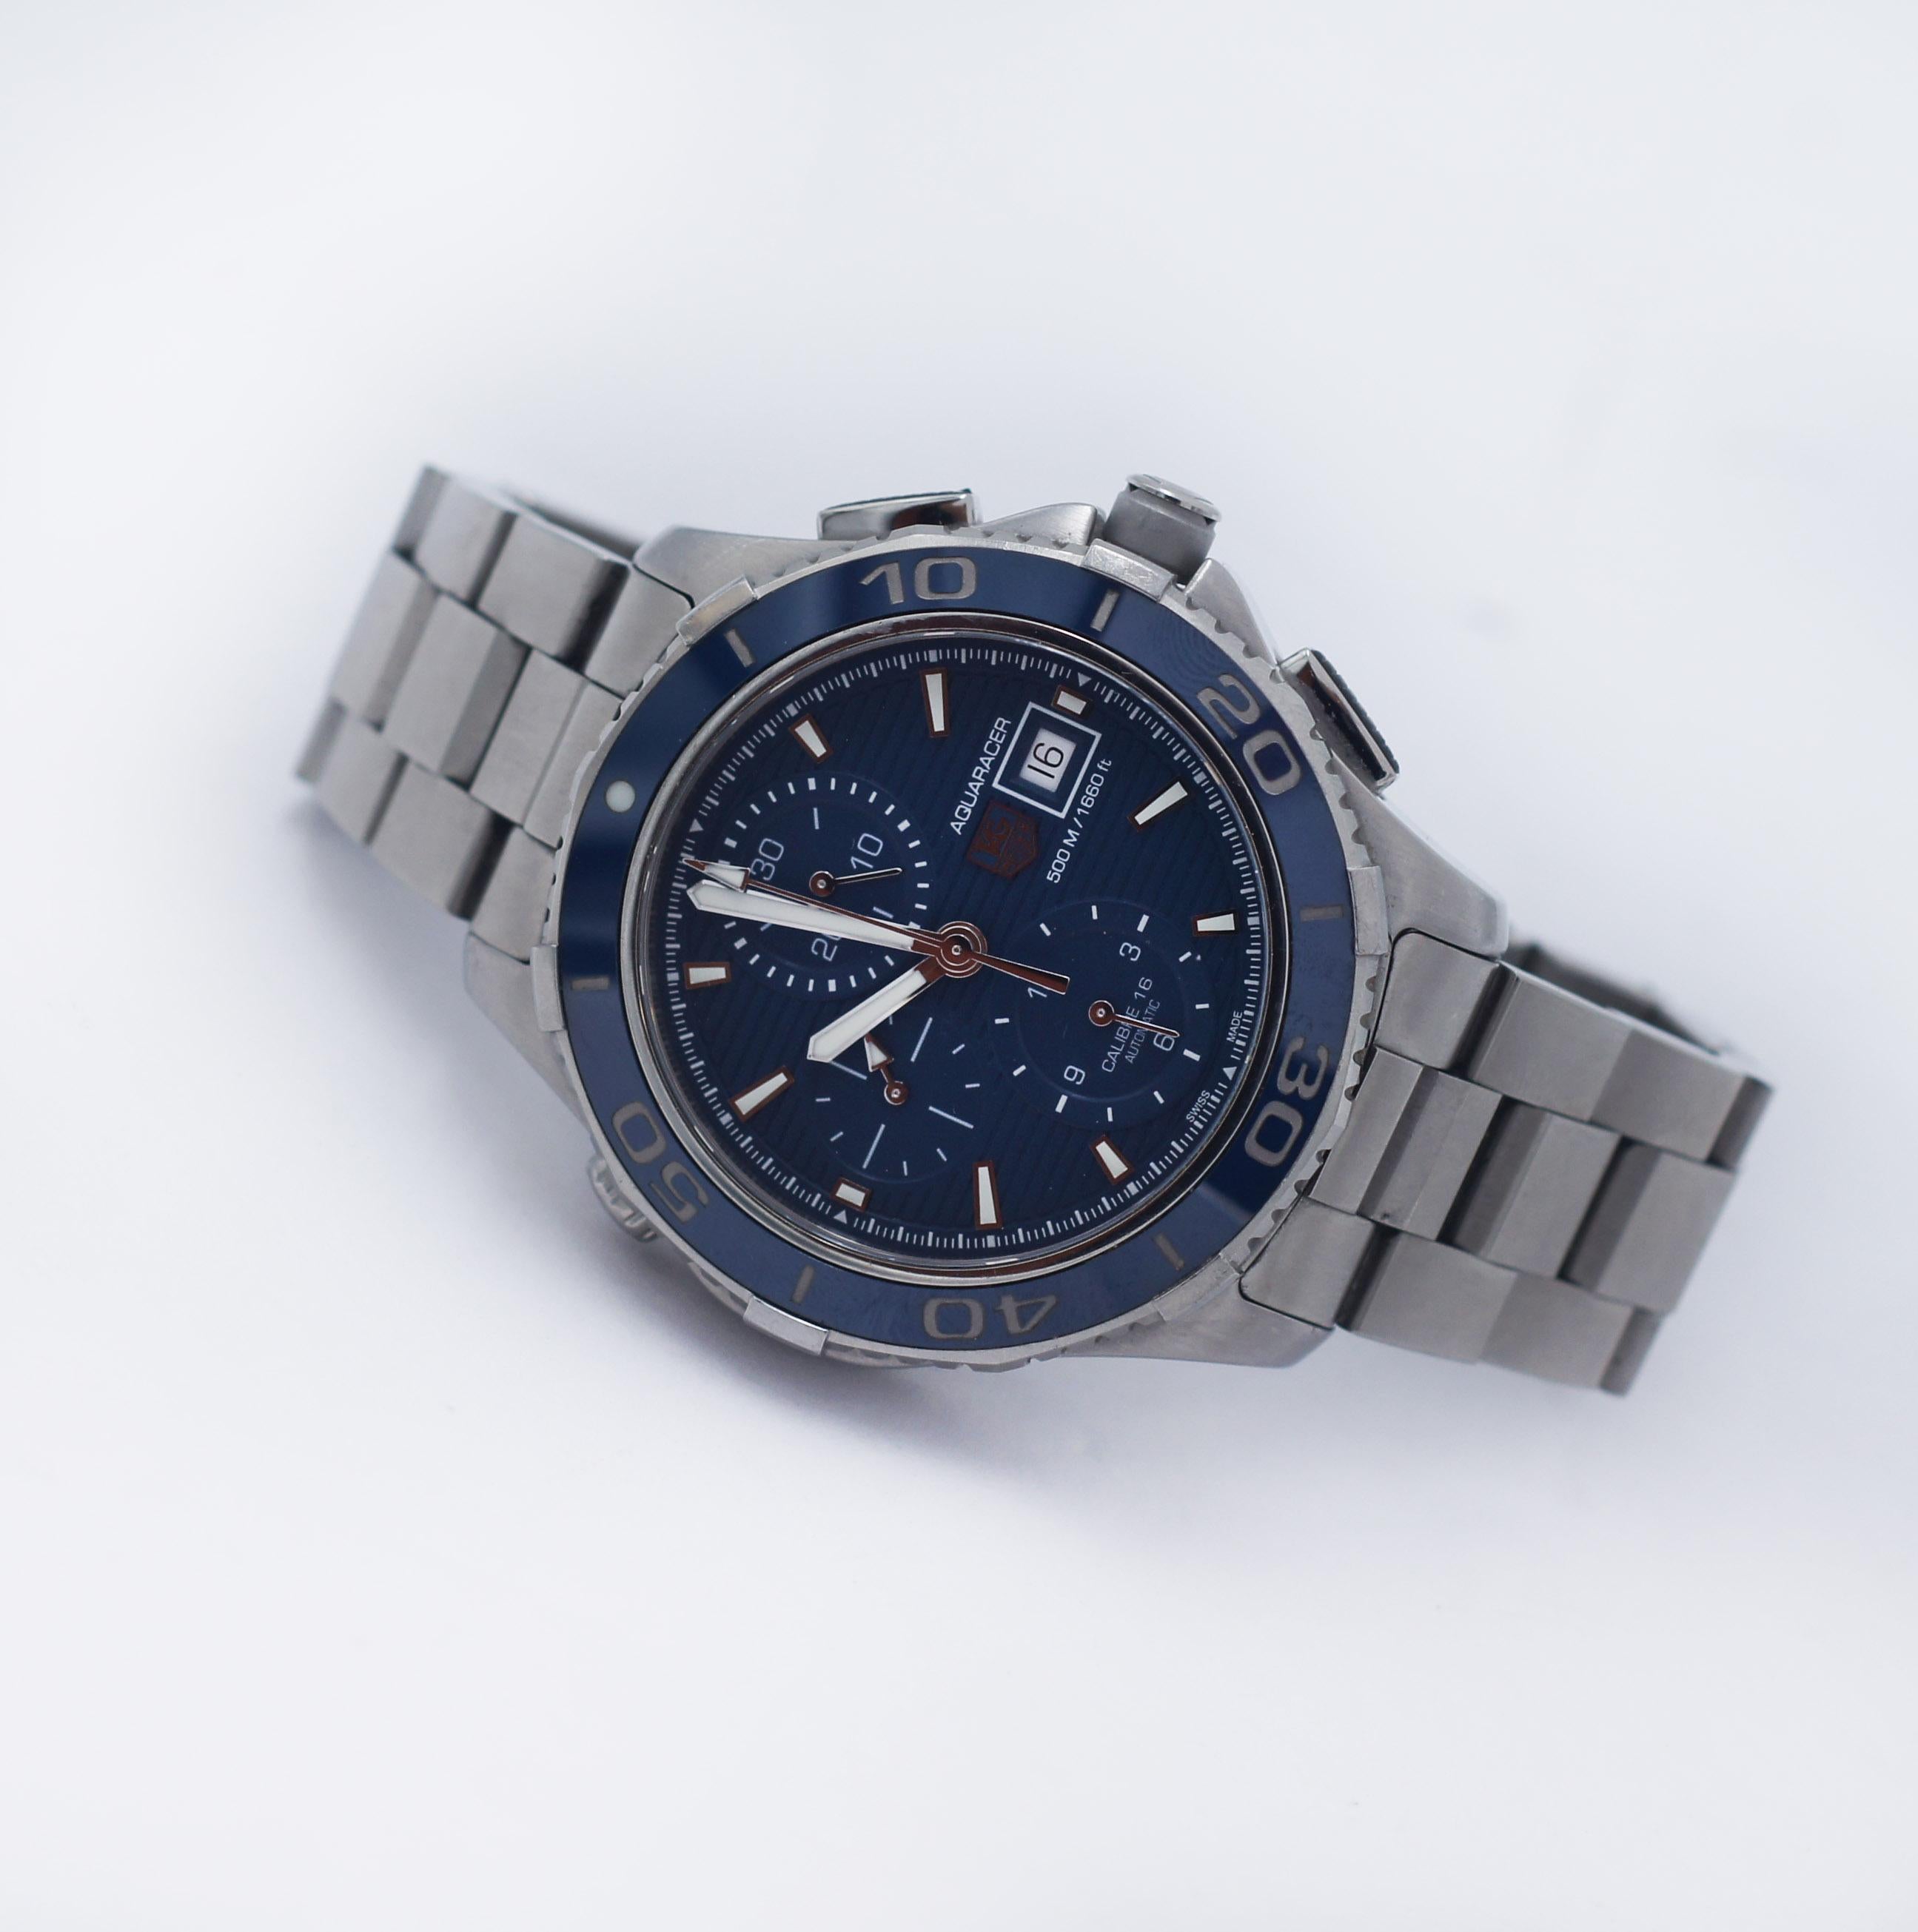 TAG HEUER
CAK2112
SPECIFICATIONS
Movement - Automatic
Features - Chronograph with 3 sub-dials
DATE window at the 3 o'clock mark 
Dial Color - Blue with luminescent Hands & Hour Markers
Caliber - Calibre 16
Power Reserve - 42 hours
Approx. Case Size